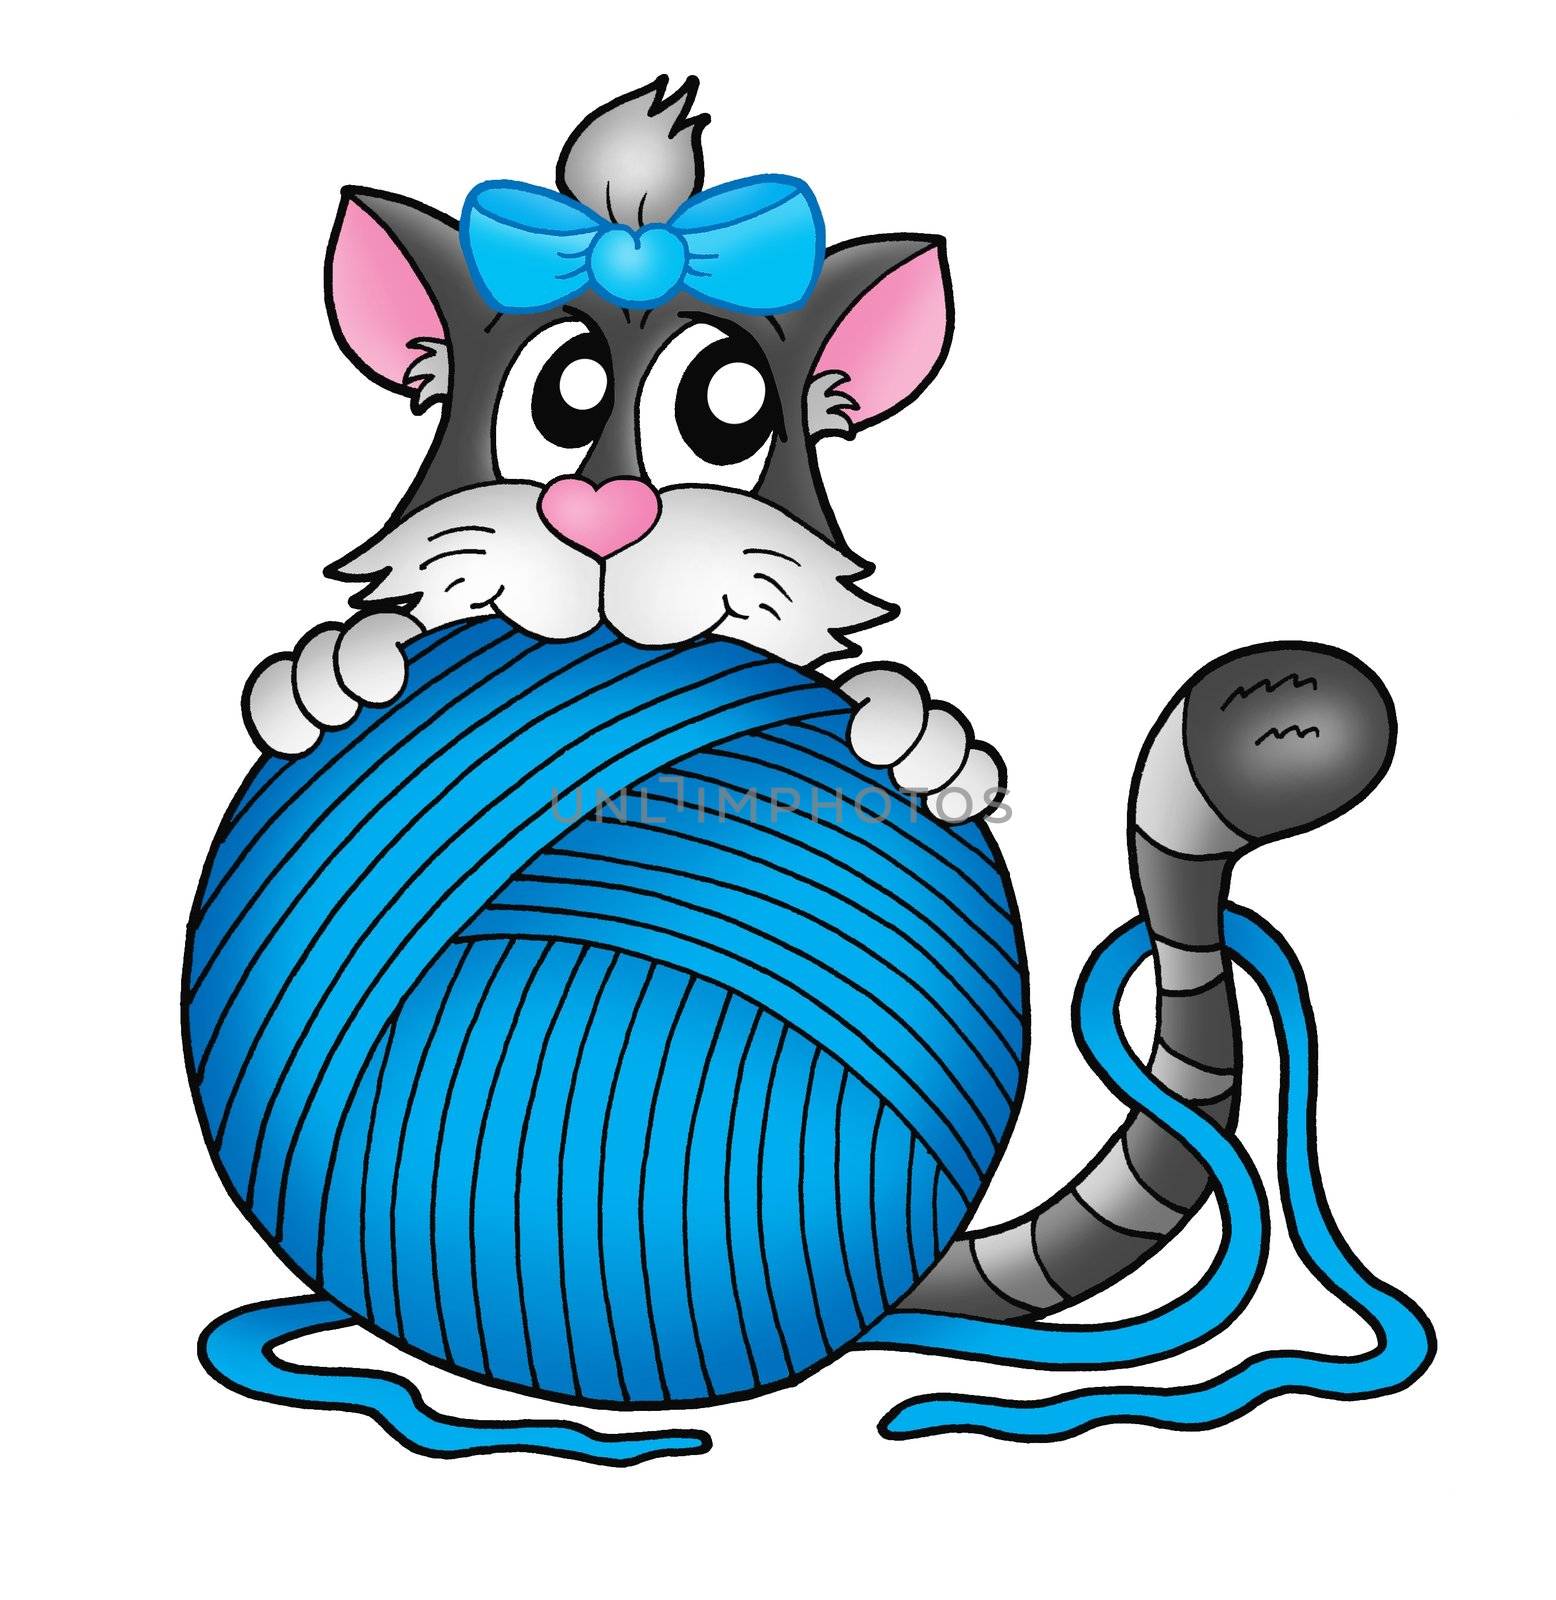 Gray cat with blue skein - color illustration.